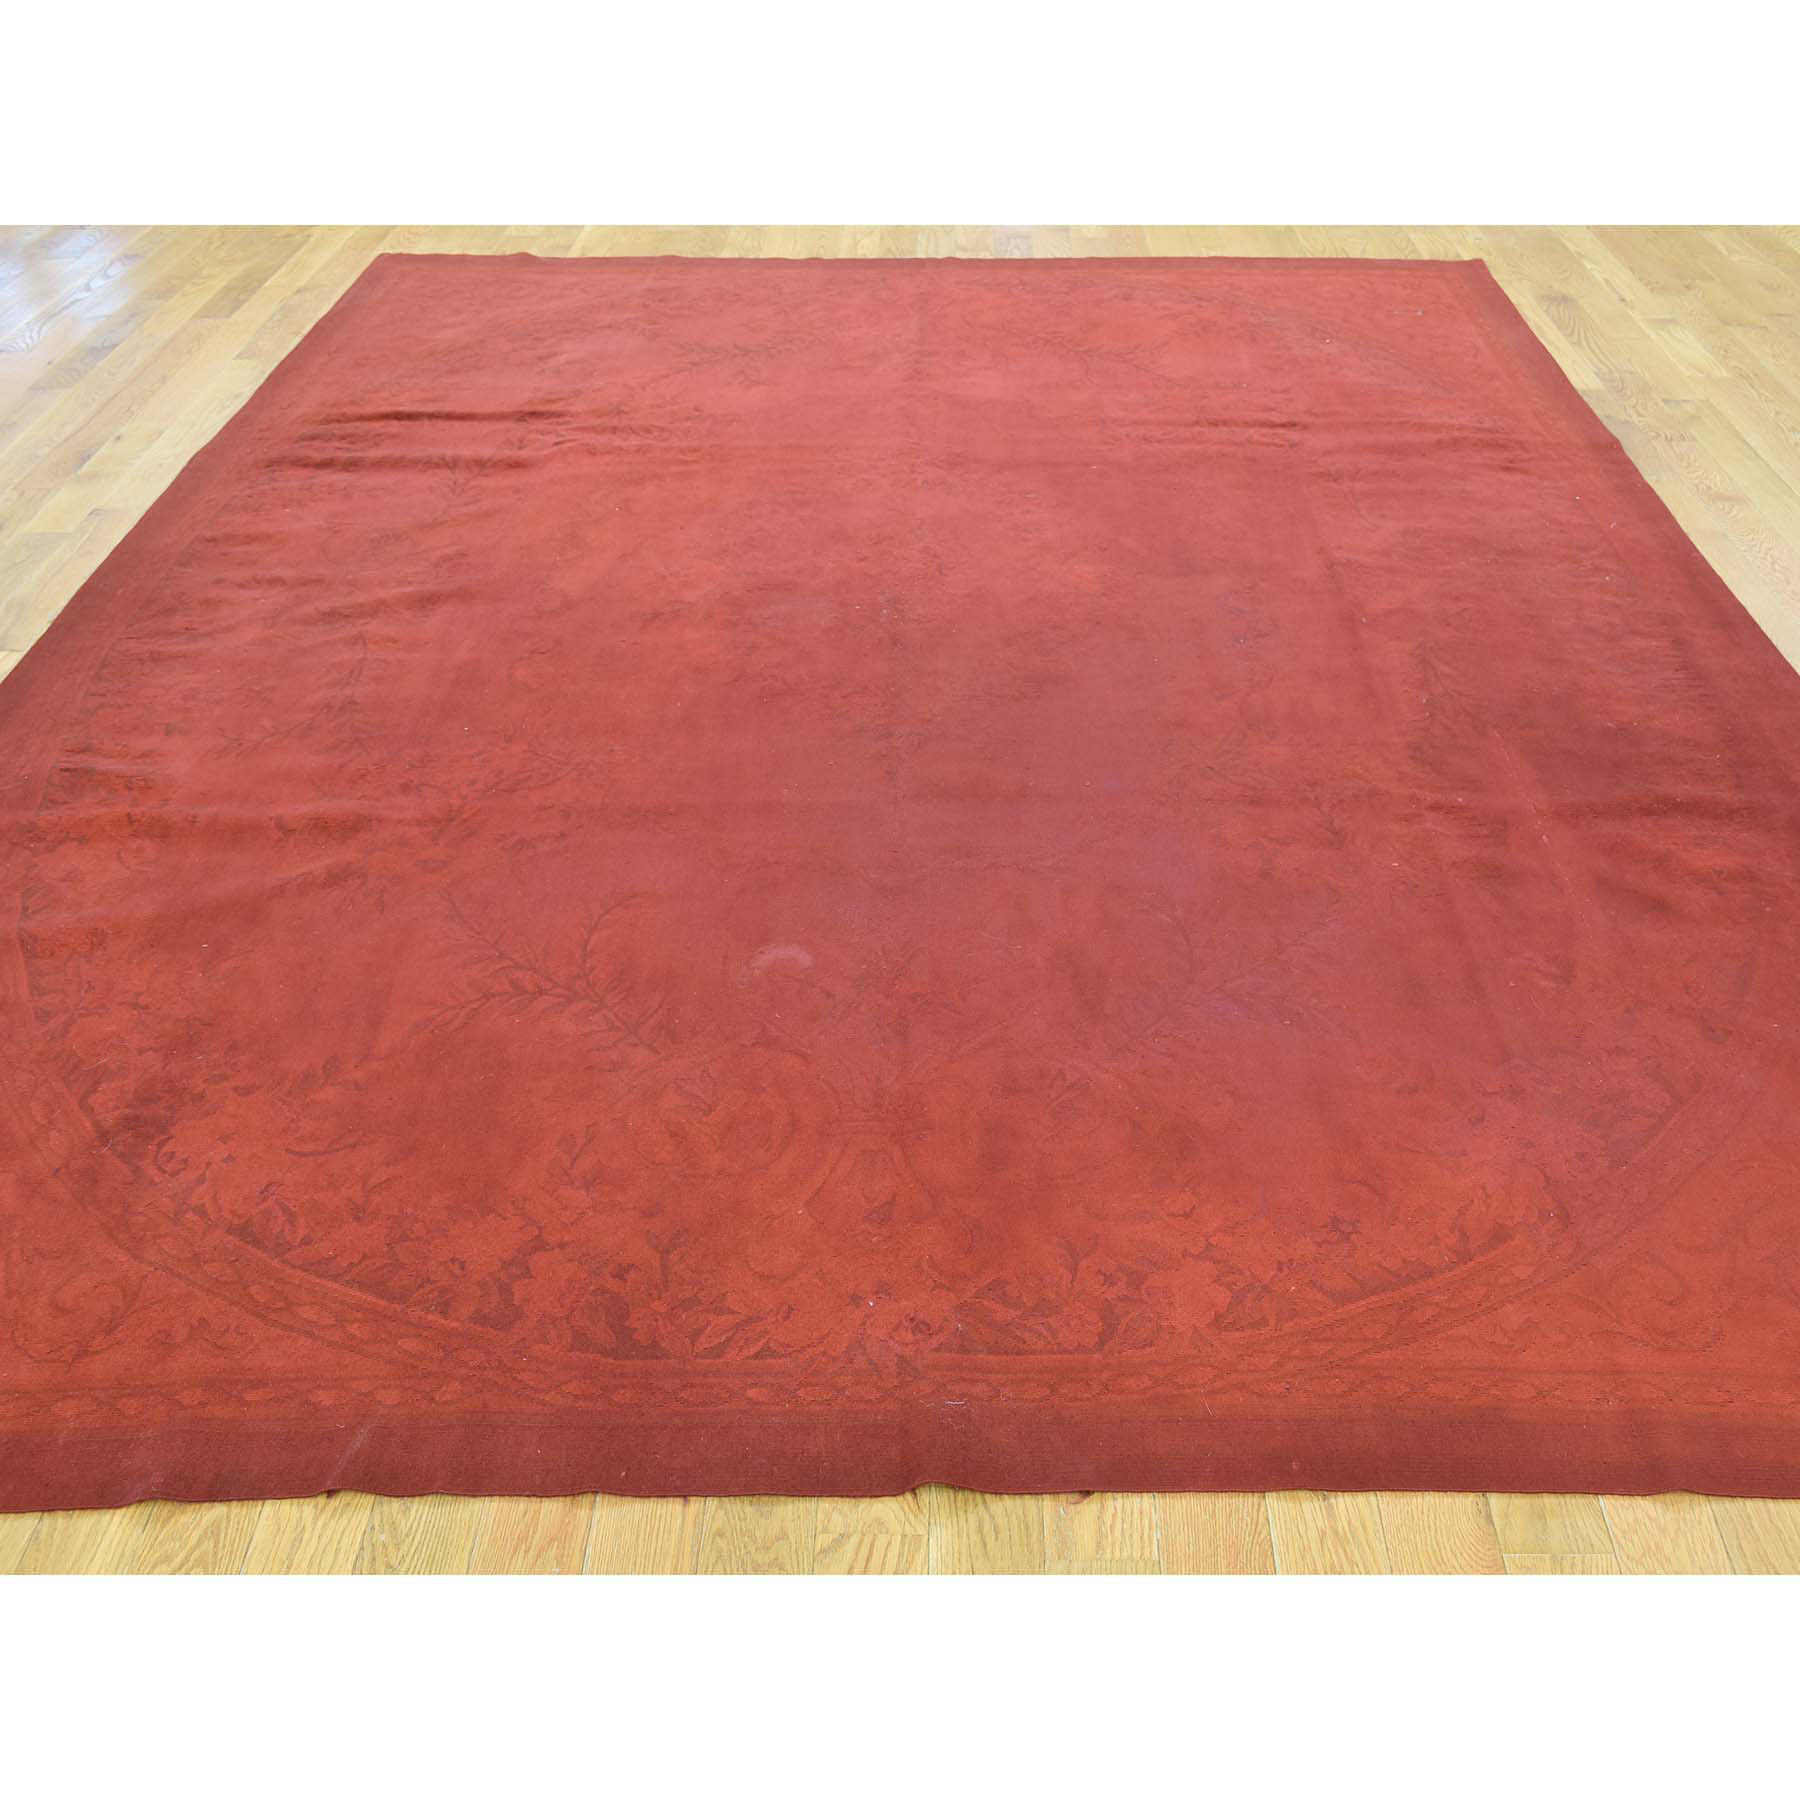 7'8"x10'3" Red Cast Hand-Woven Pure Wool Overdyed Aubusson Oriental Rug 